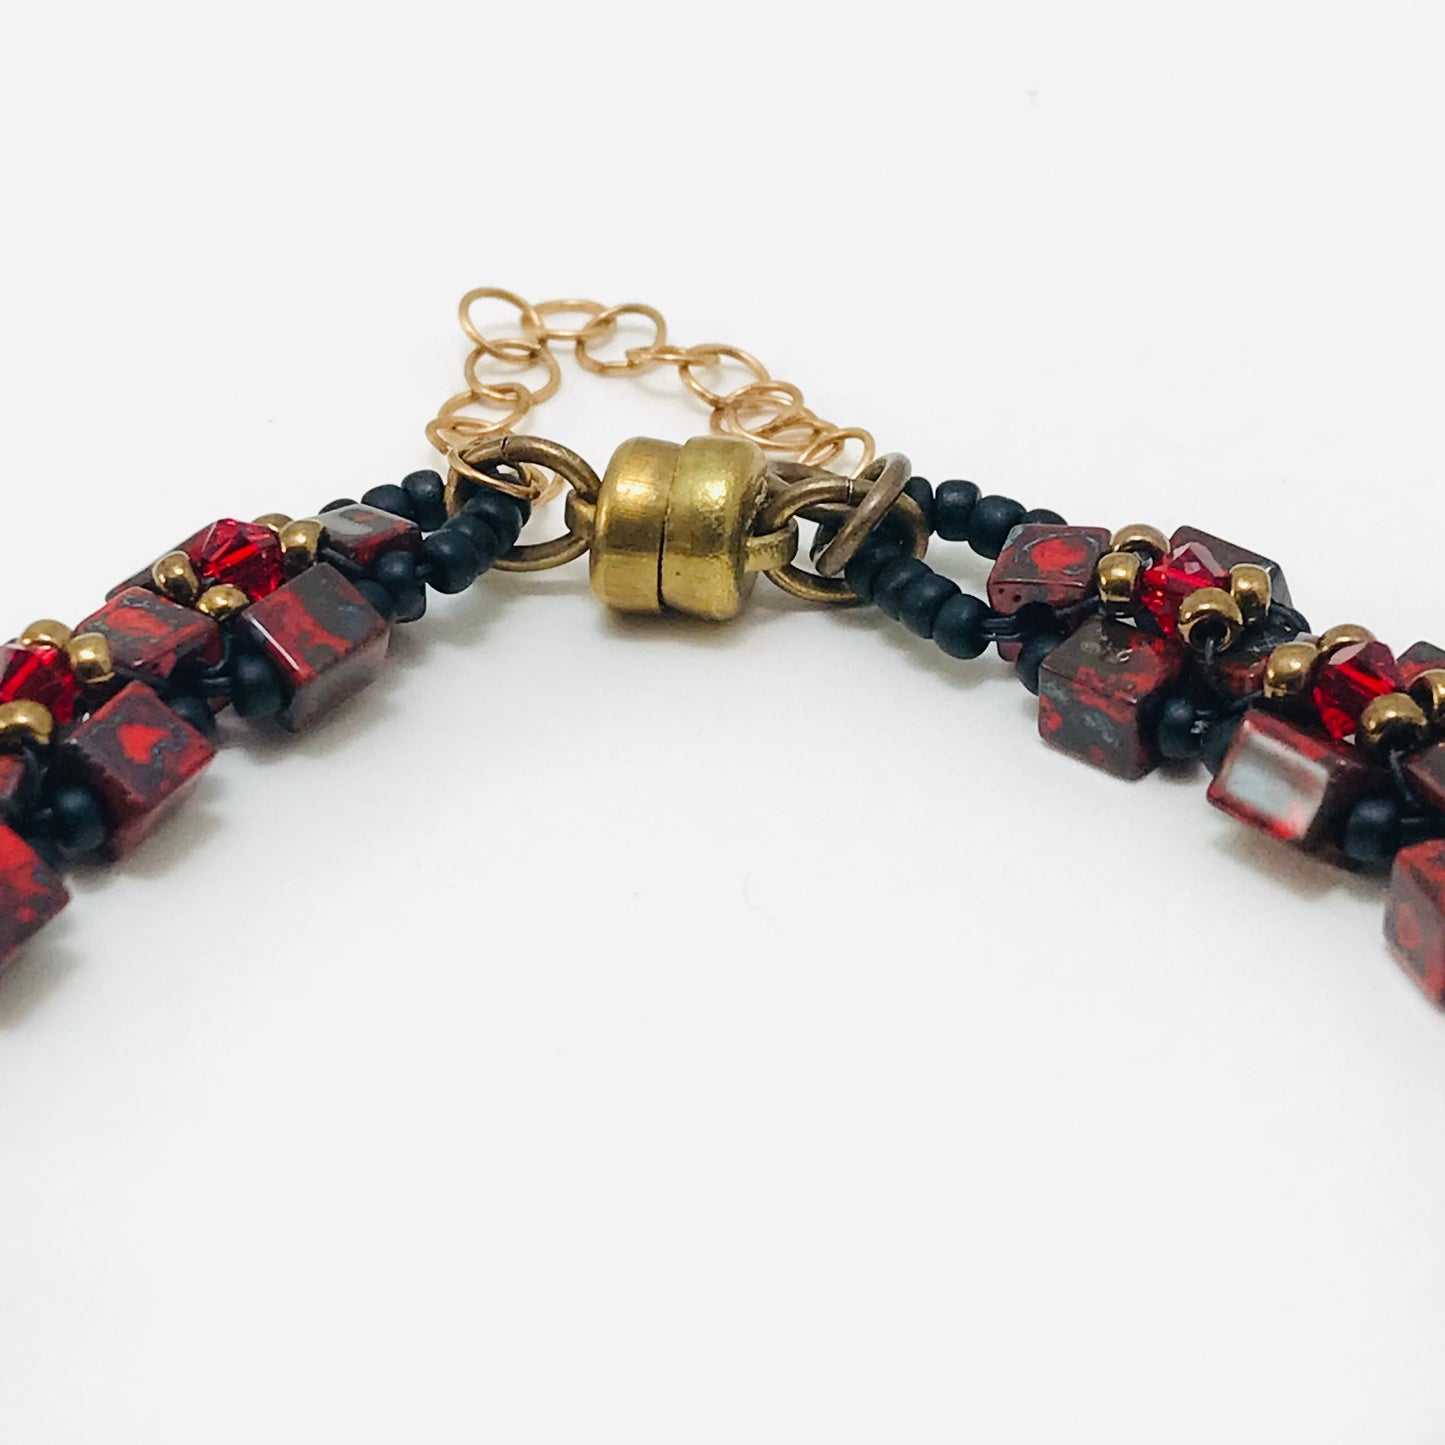 Picasso Red with Red Austrian Crystal Embellished Bracelet